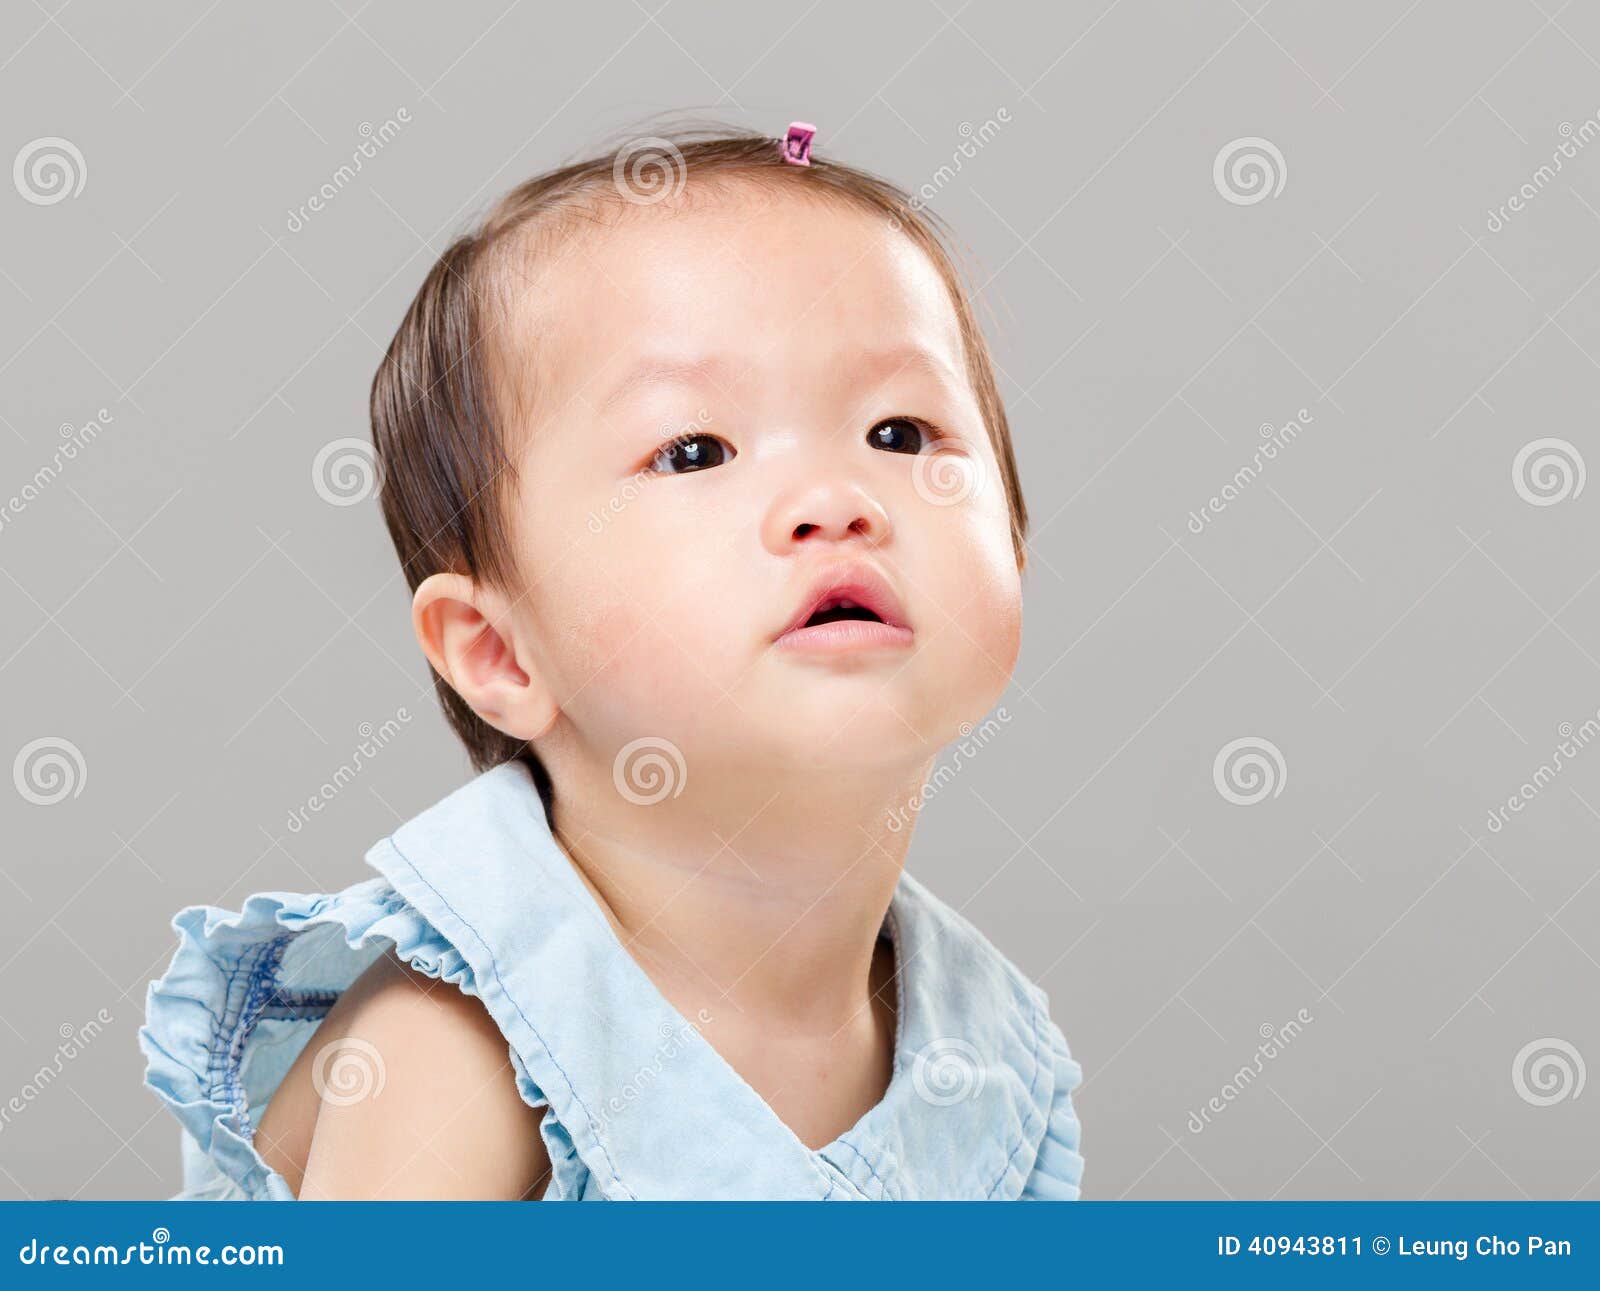 Baby looking up stock image. Image of looking, asia, closeup - 40943811